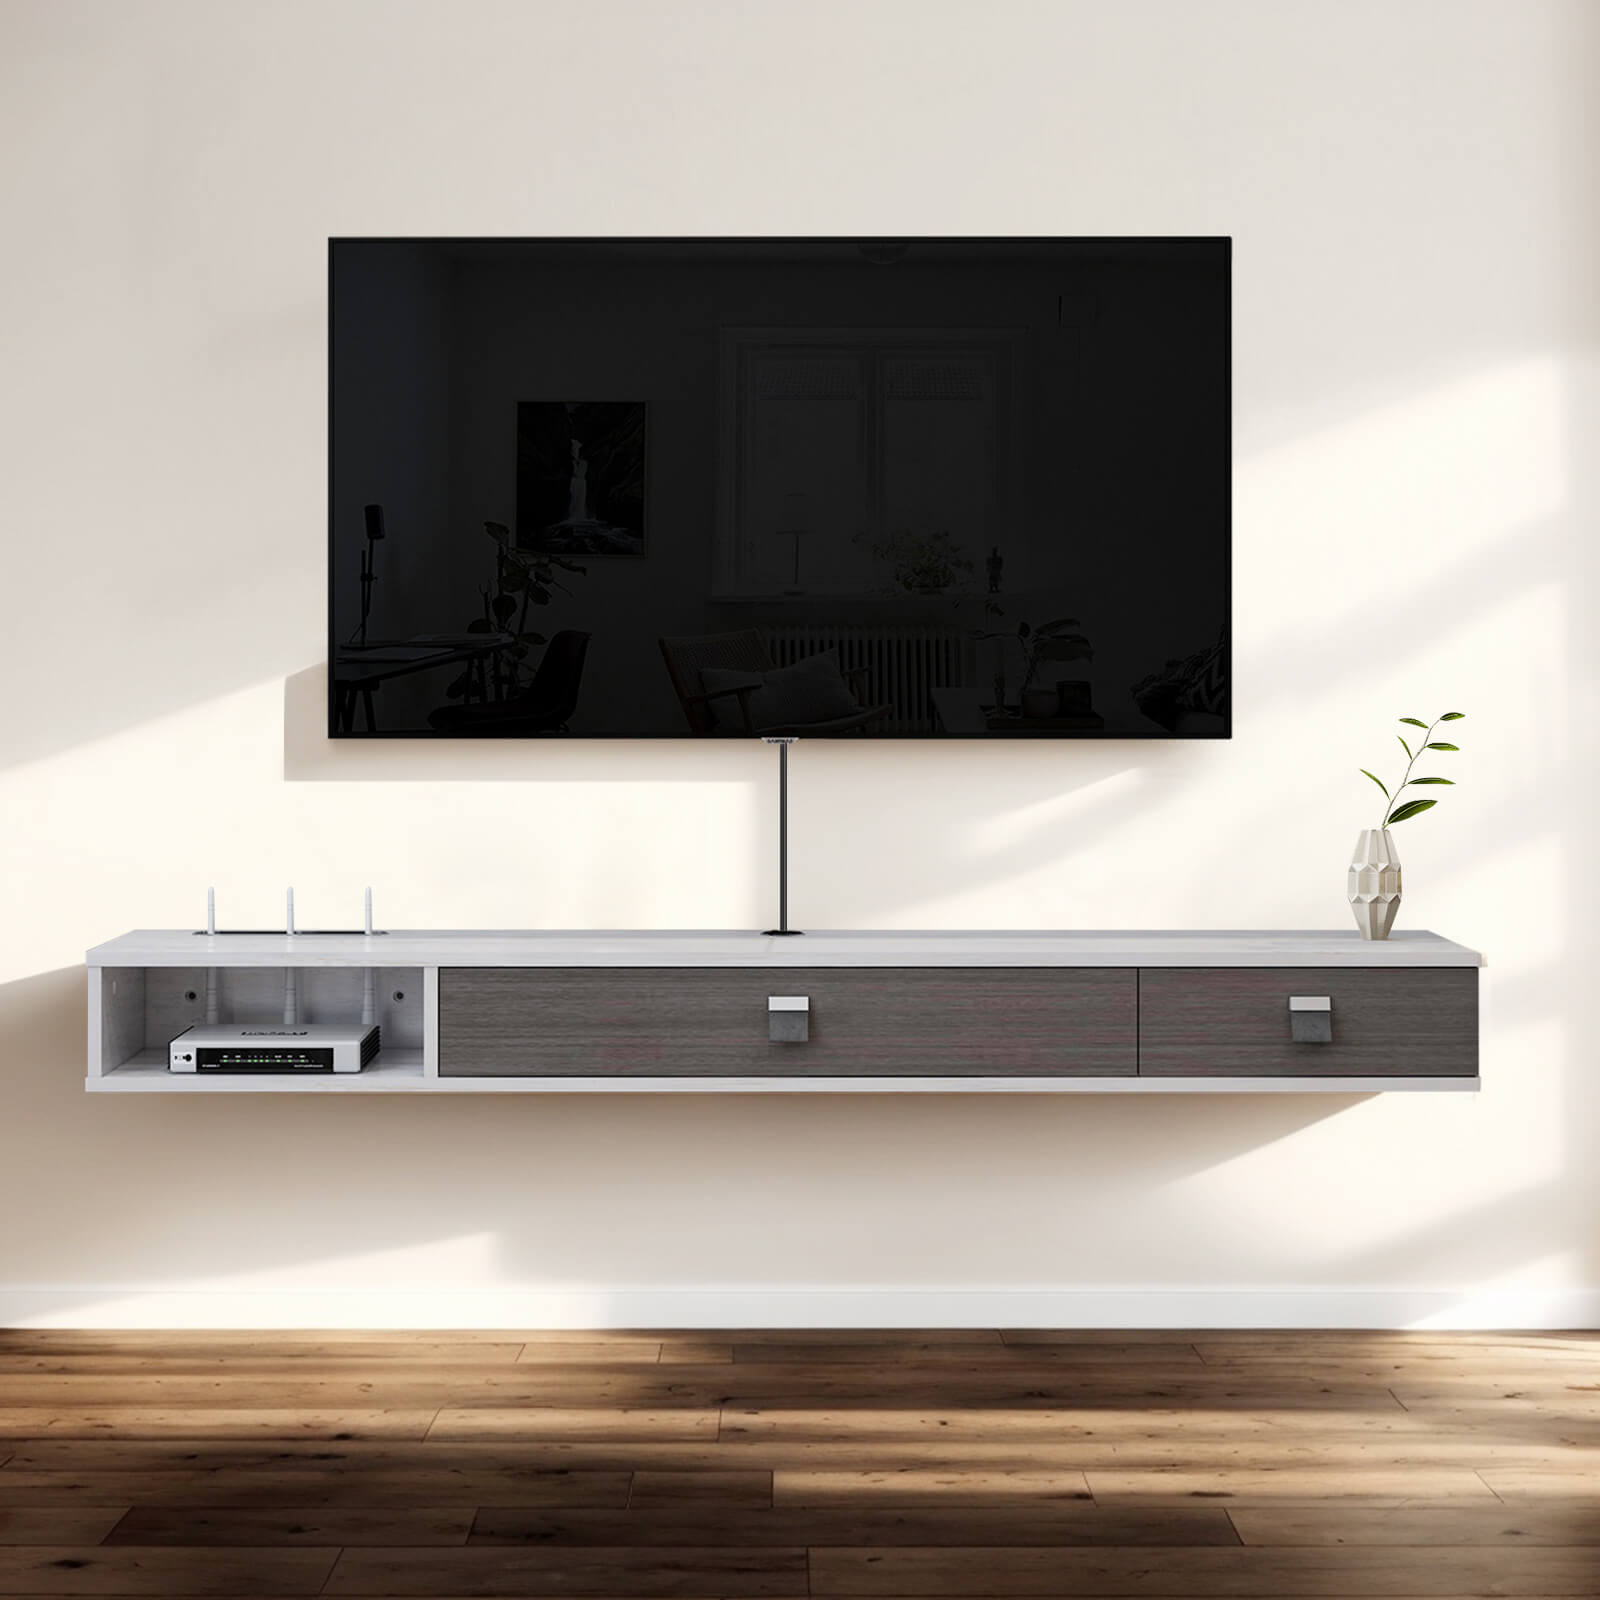 55.1" Plywood Floating TV Stand Wall Shelf with Two Doors for 55" 60" Televisions, White